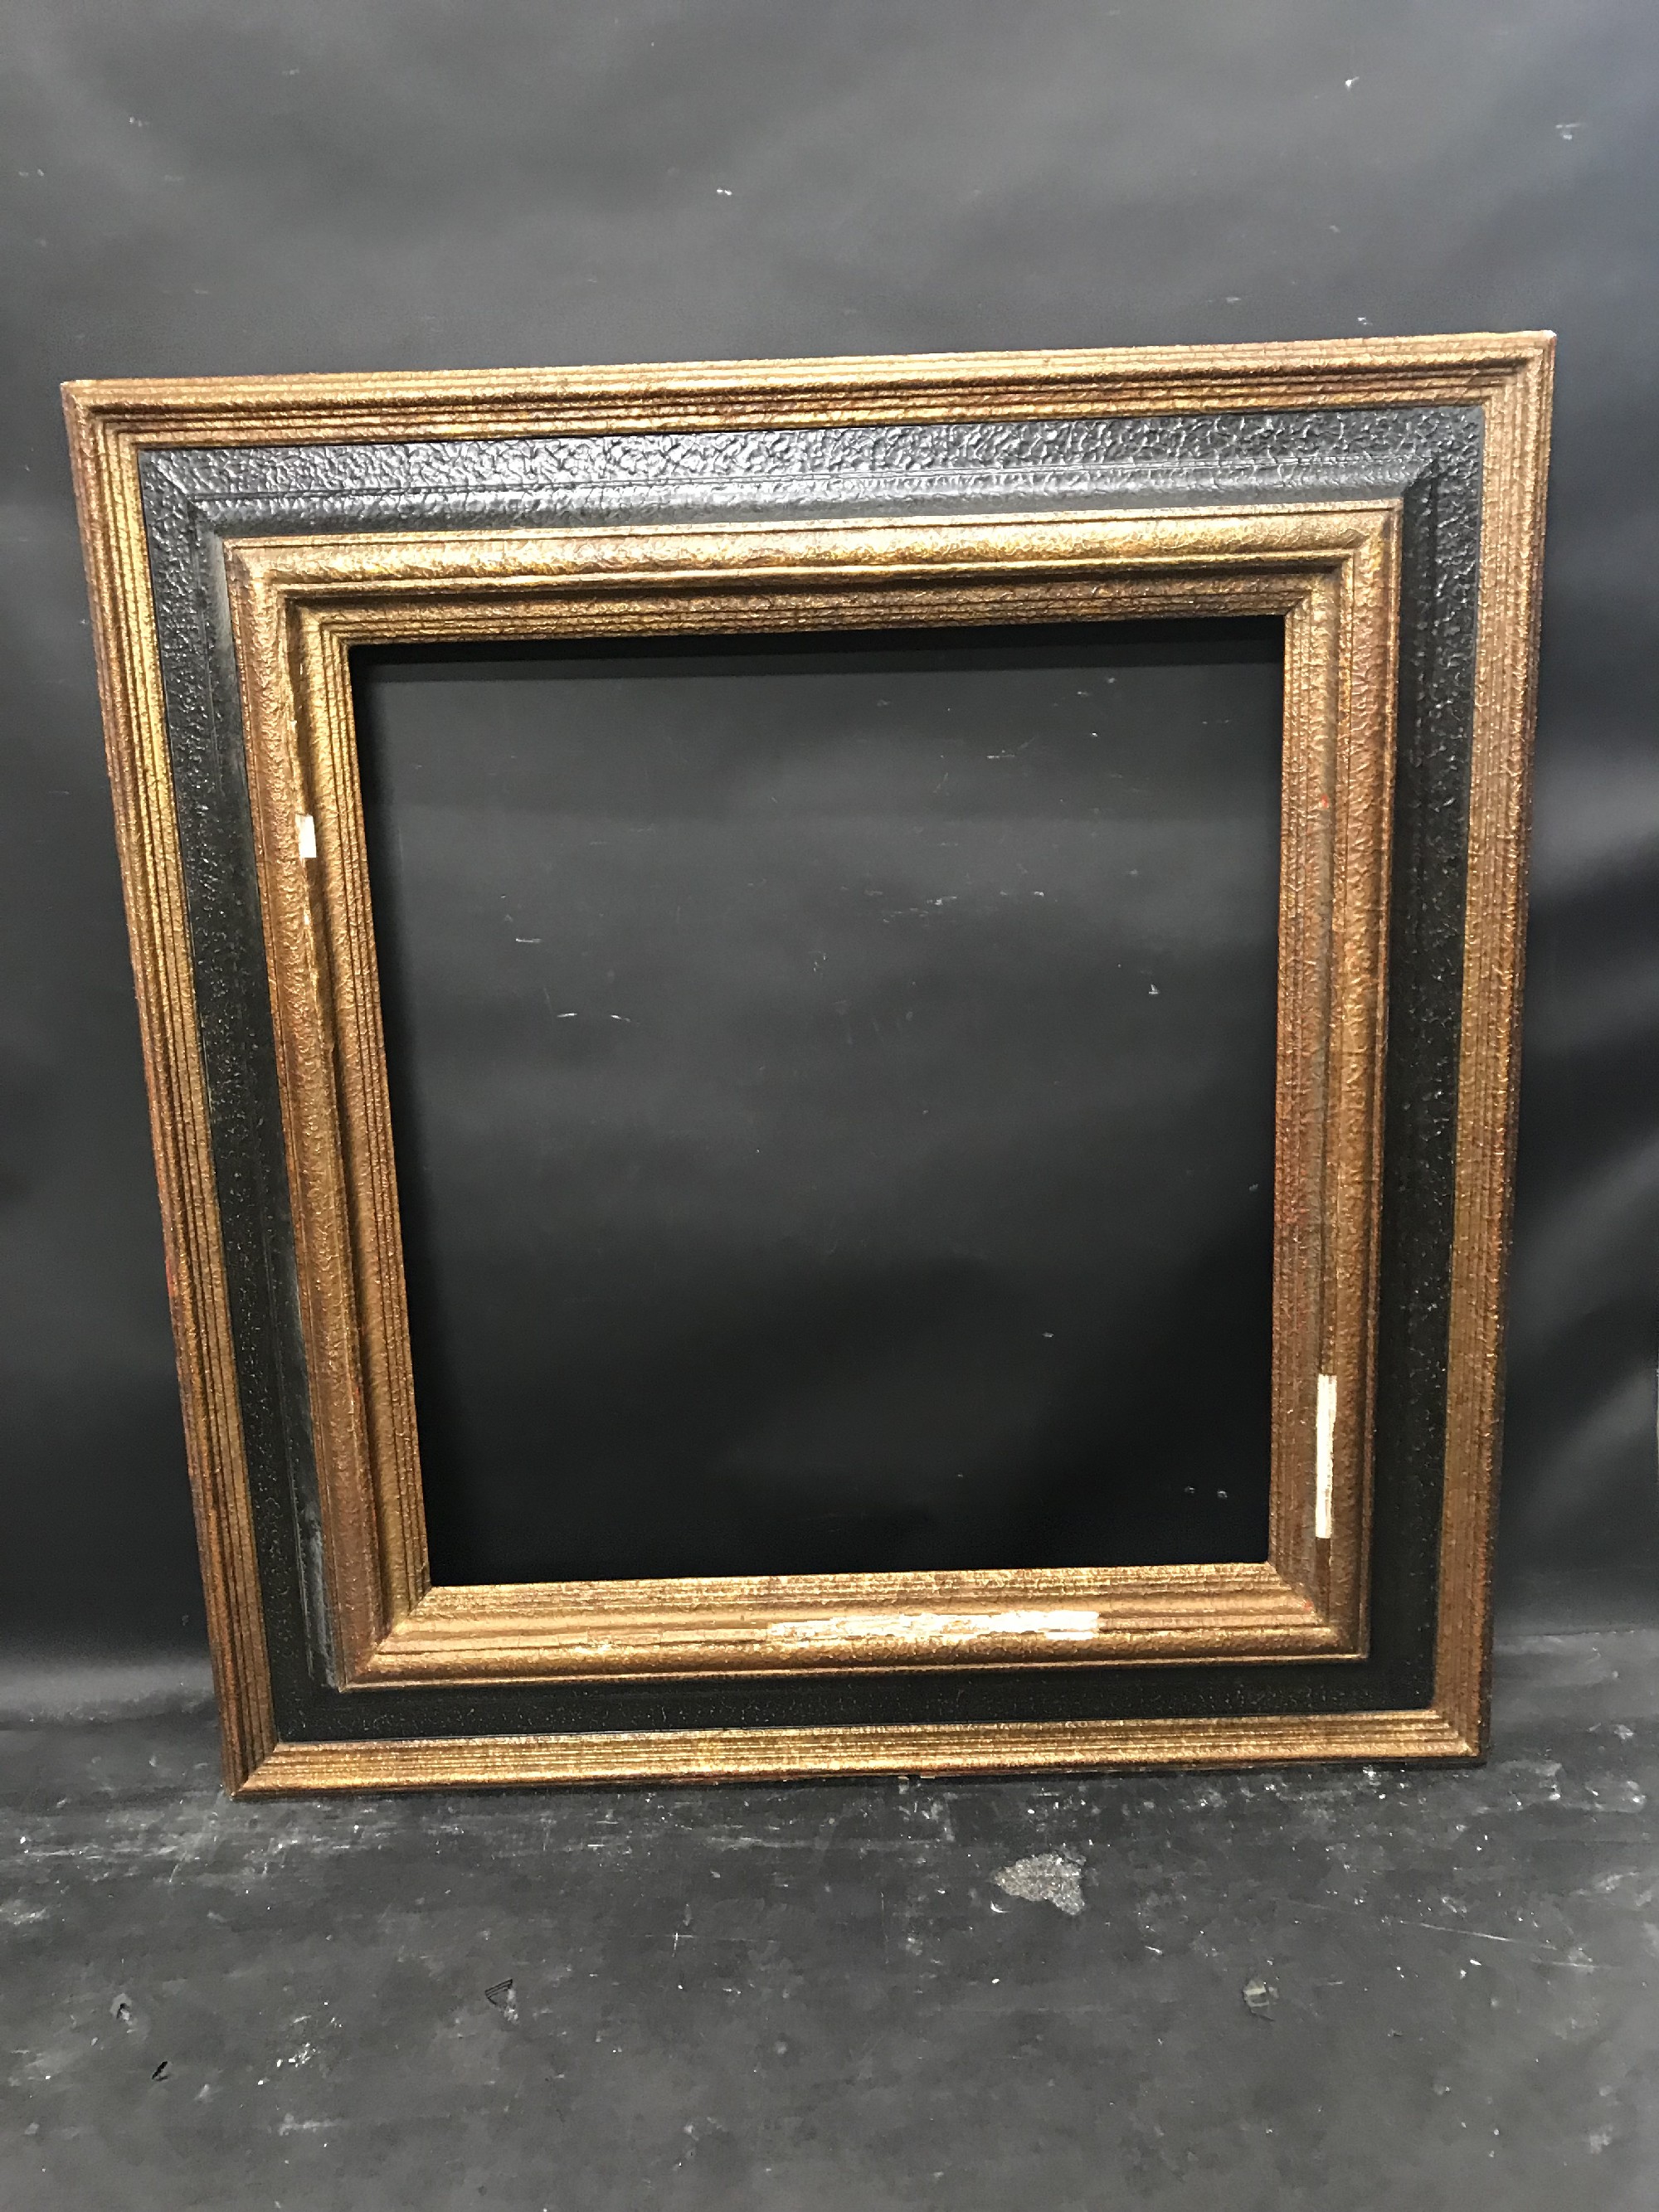 20th Century European School. A Gilt and Black Composition Frame, 25.5" x 23.5". - Image 2 of 3